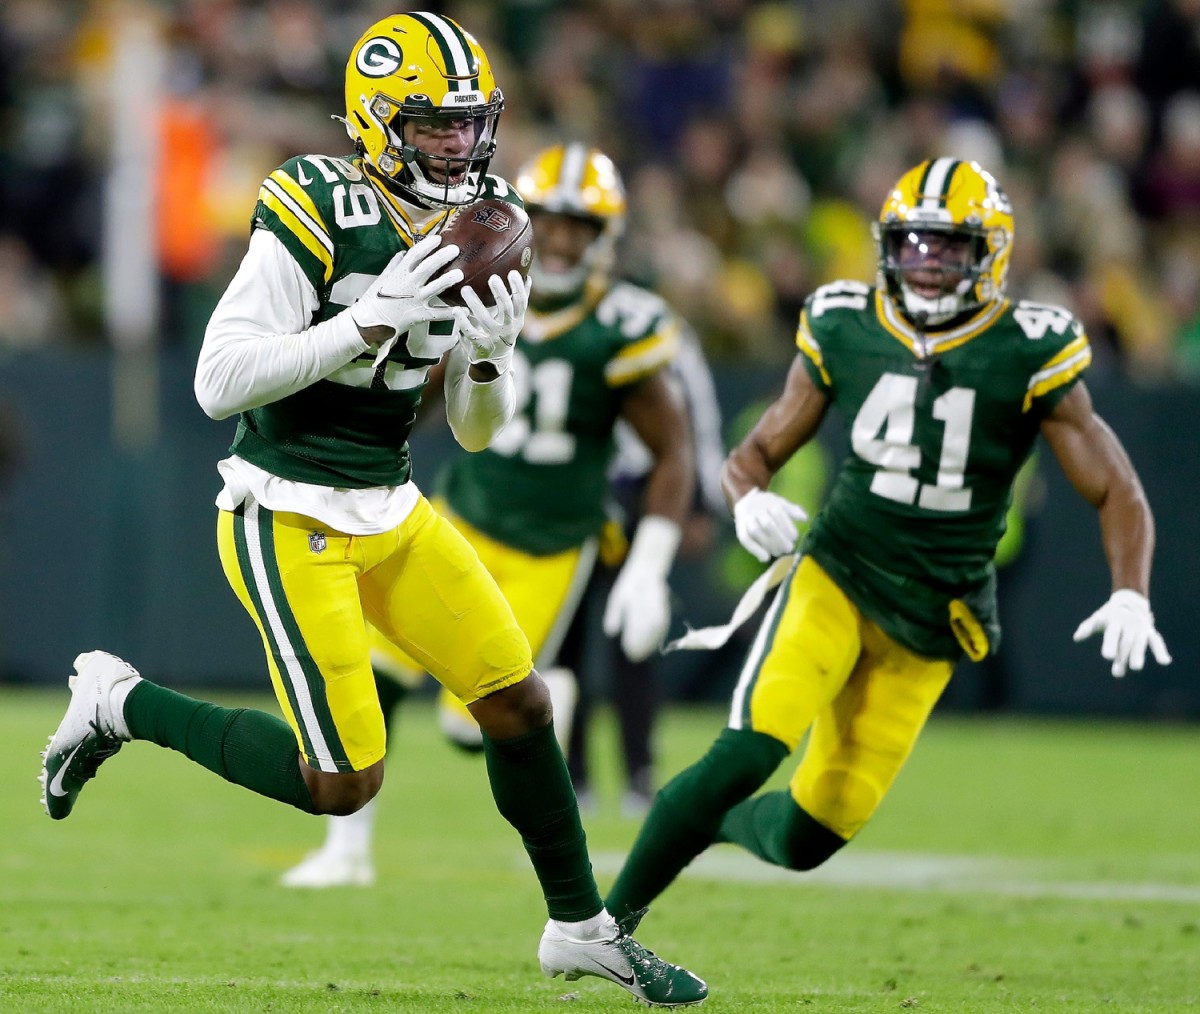 Green Bay Packers cornerback Rasul Douglas (29) intercepts a pass in the second half against the Los Angeles Rams during their football game on Sunday November 28, 2021, at Lambeau Field in Green Bay, Wis.